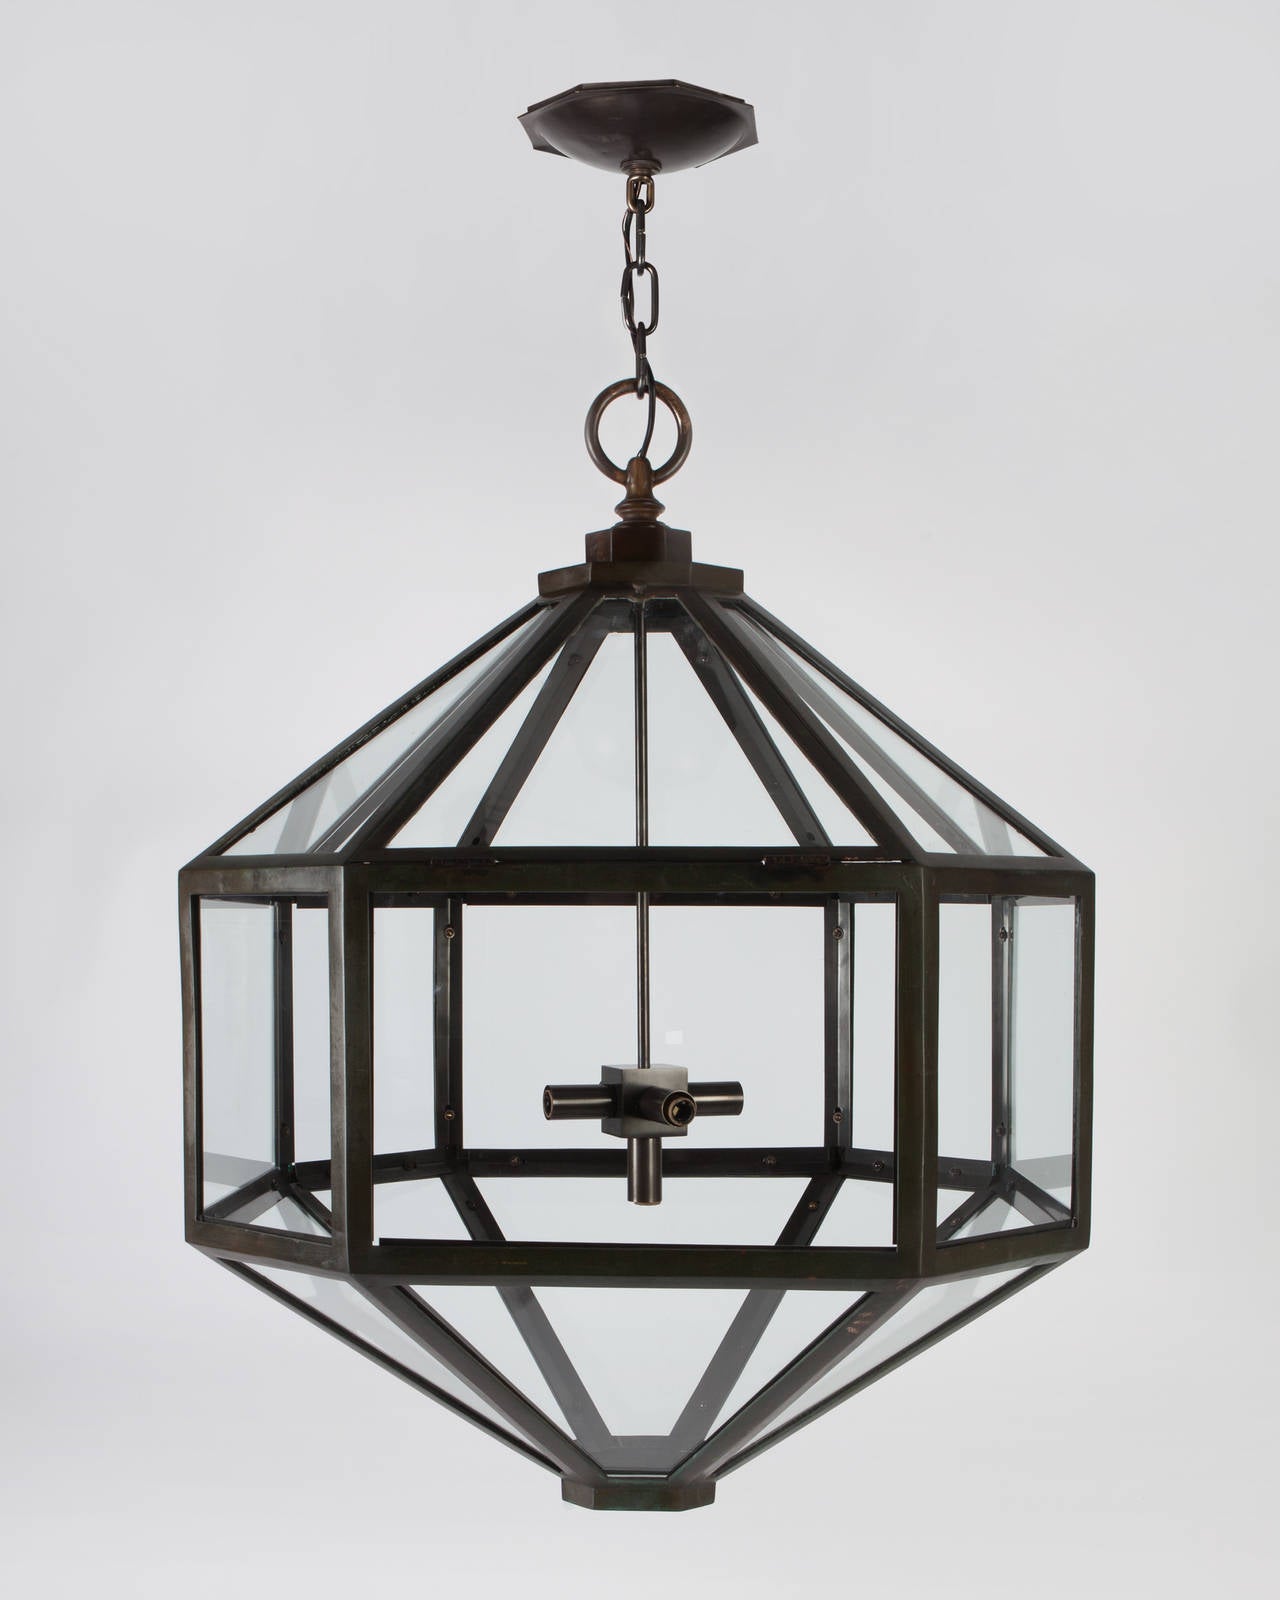 AHL3884

Circa 1920
A large antique icosikaitetragonal lantern in its original aged brass finish, with a modern lamping cluster of our devising. Glazed with clear glass panels.

Dimensions:
Current height: 70